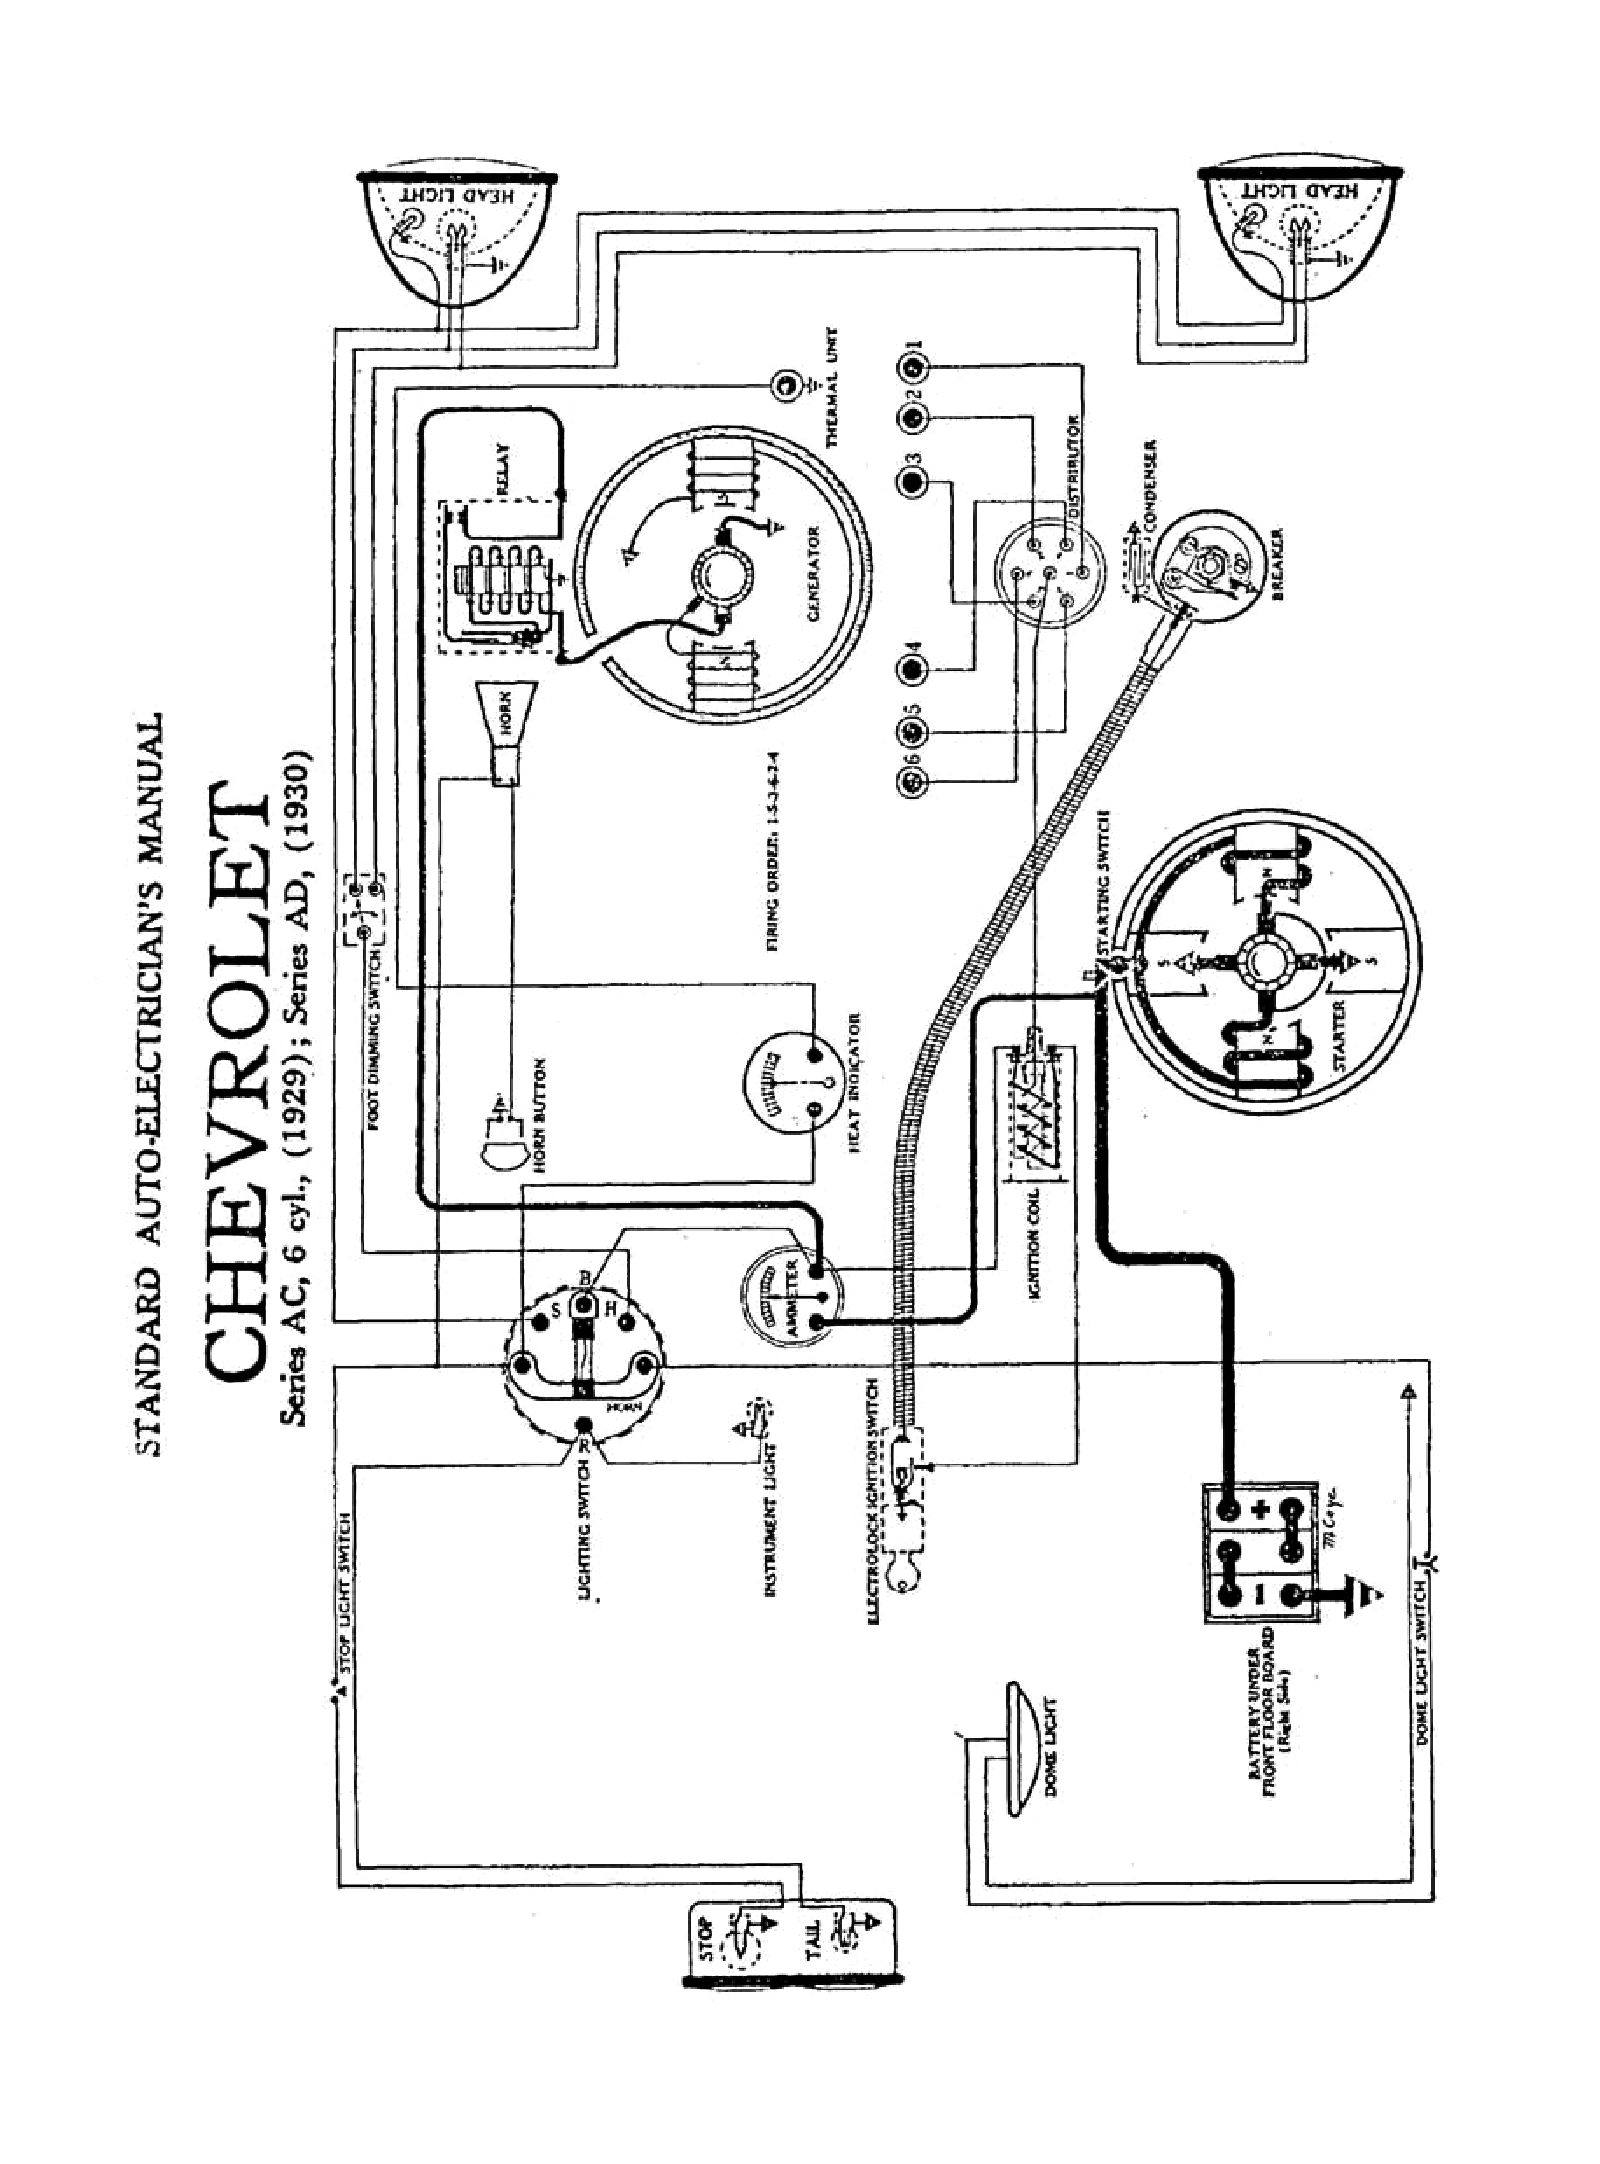 Chevy Wiring Diagrams, Chevrolet Truck Wiring Diagrams Free